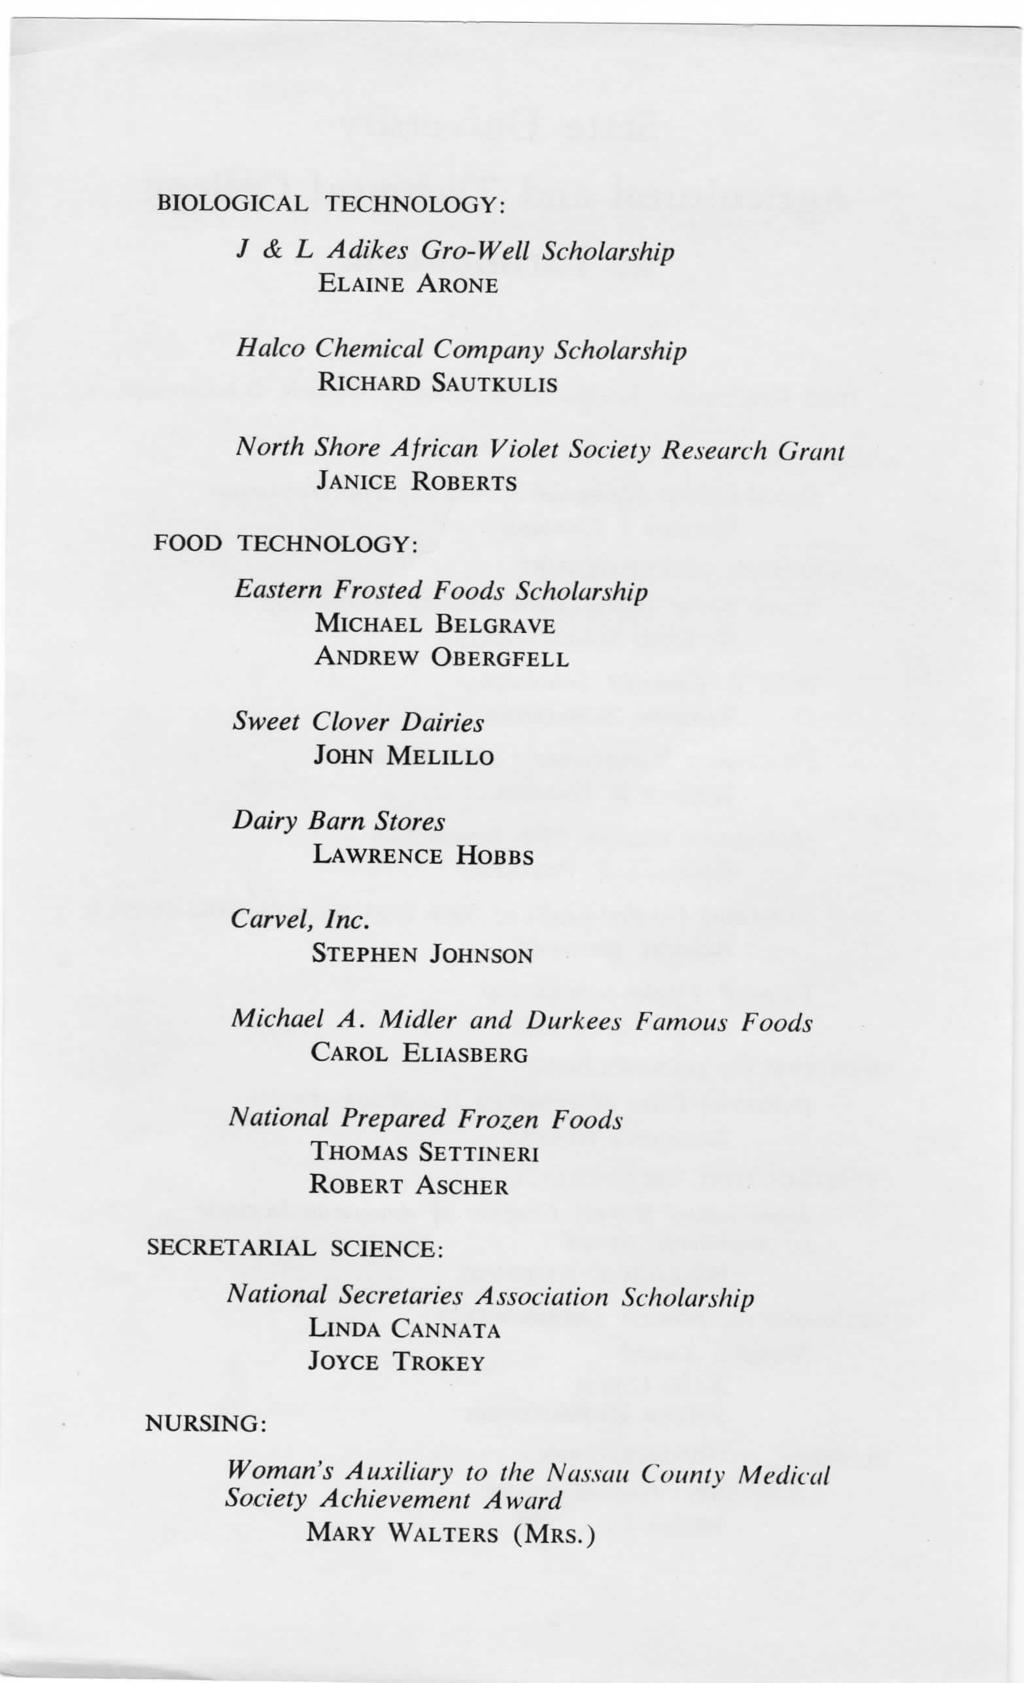 BIOLOGICAL TECHNOLOGY: / & L A dikes Gro-Well Scholarship ELAINE ARONE Halco Chemical Company Scholarship RICHARD SAUTKULIS North Shore African Violet Society Research Cram JANICE ROBERTS FOOD